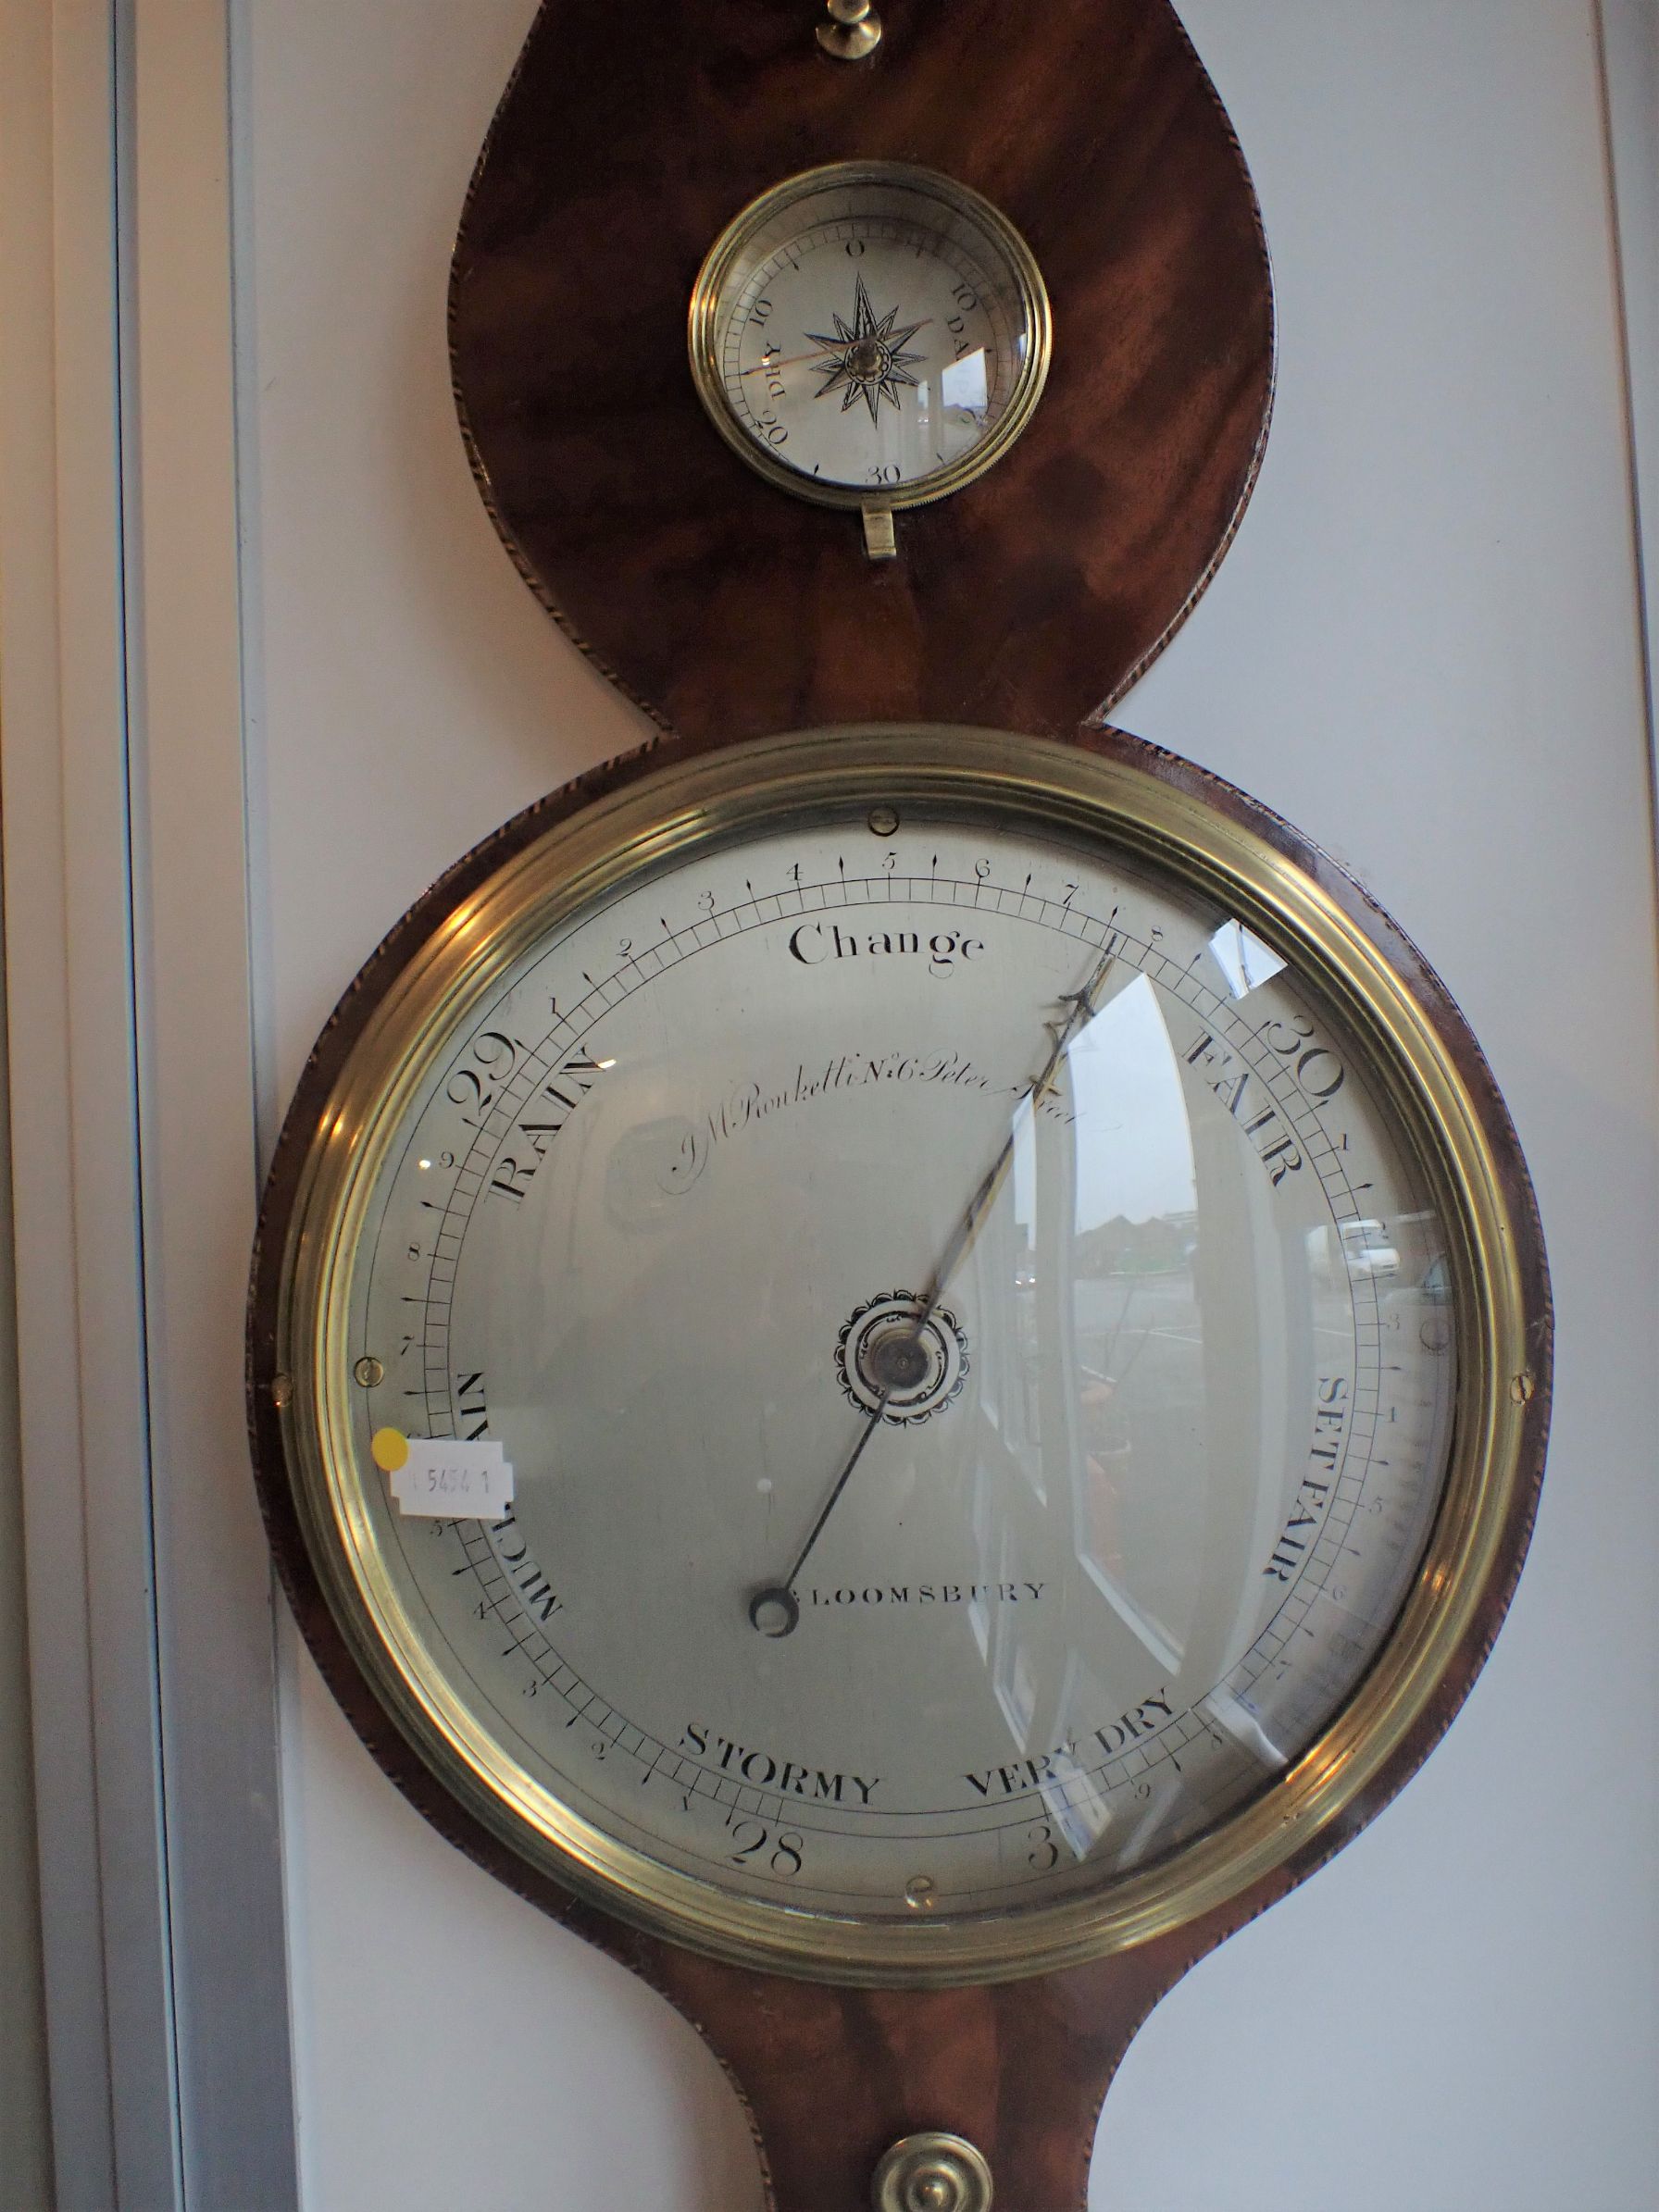 A 19TH CENTURY WHEEL BAROMETER BY J.M. RONKETTI - Image 2 of 2